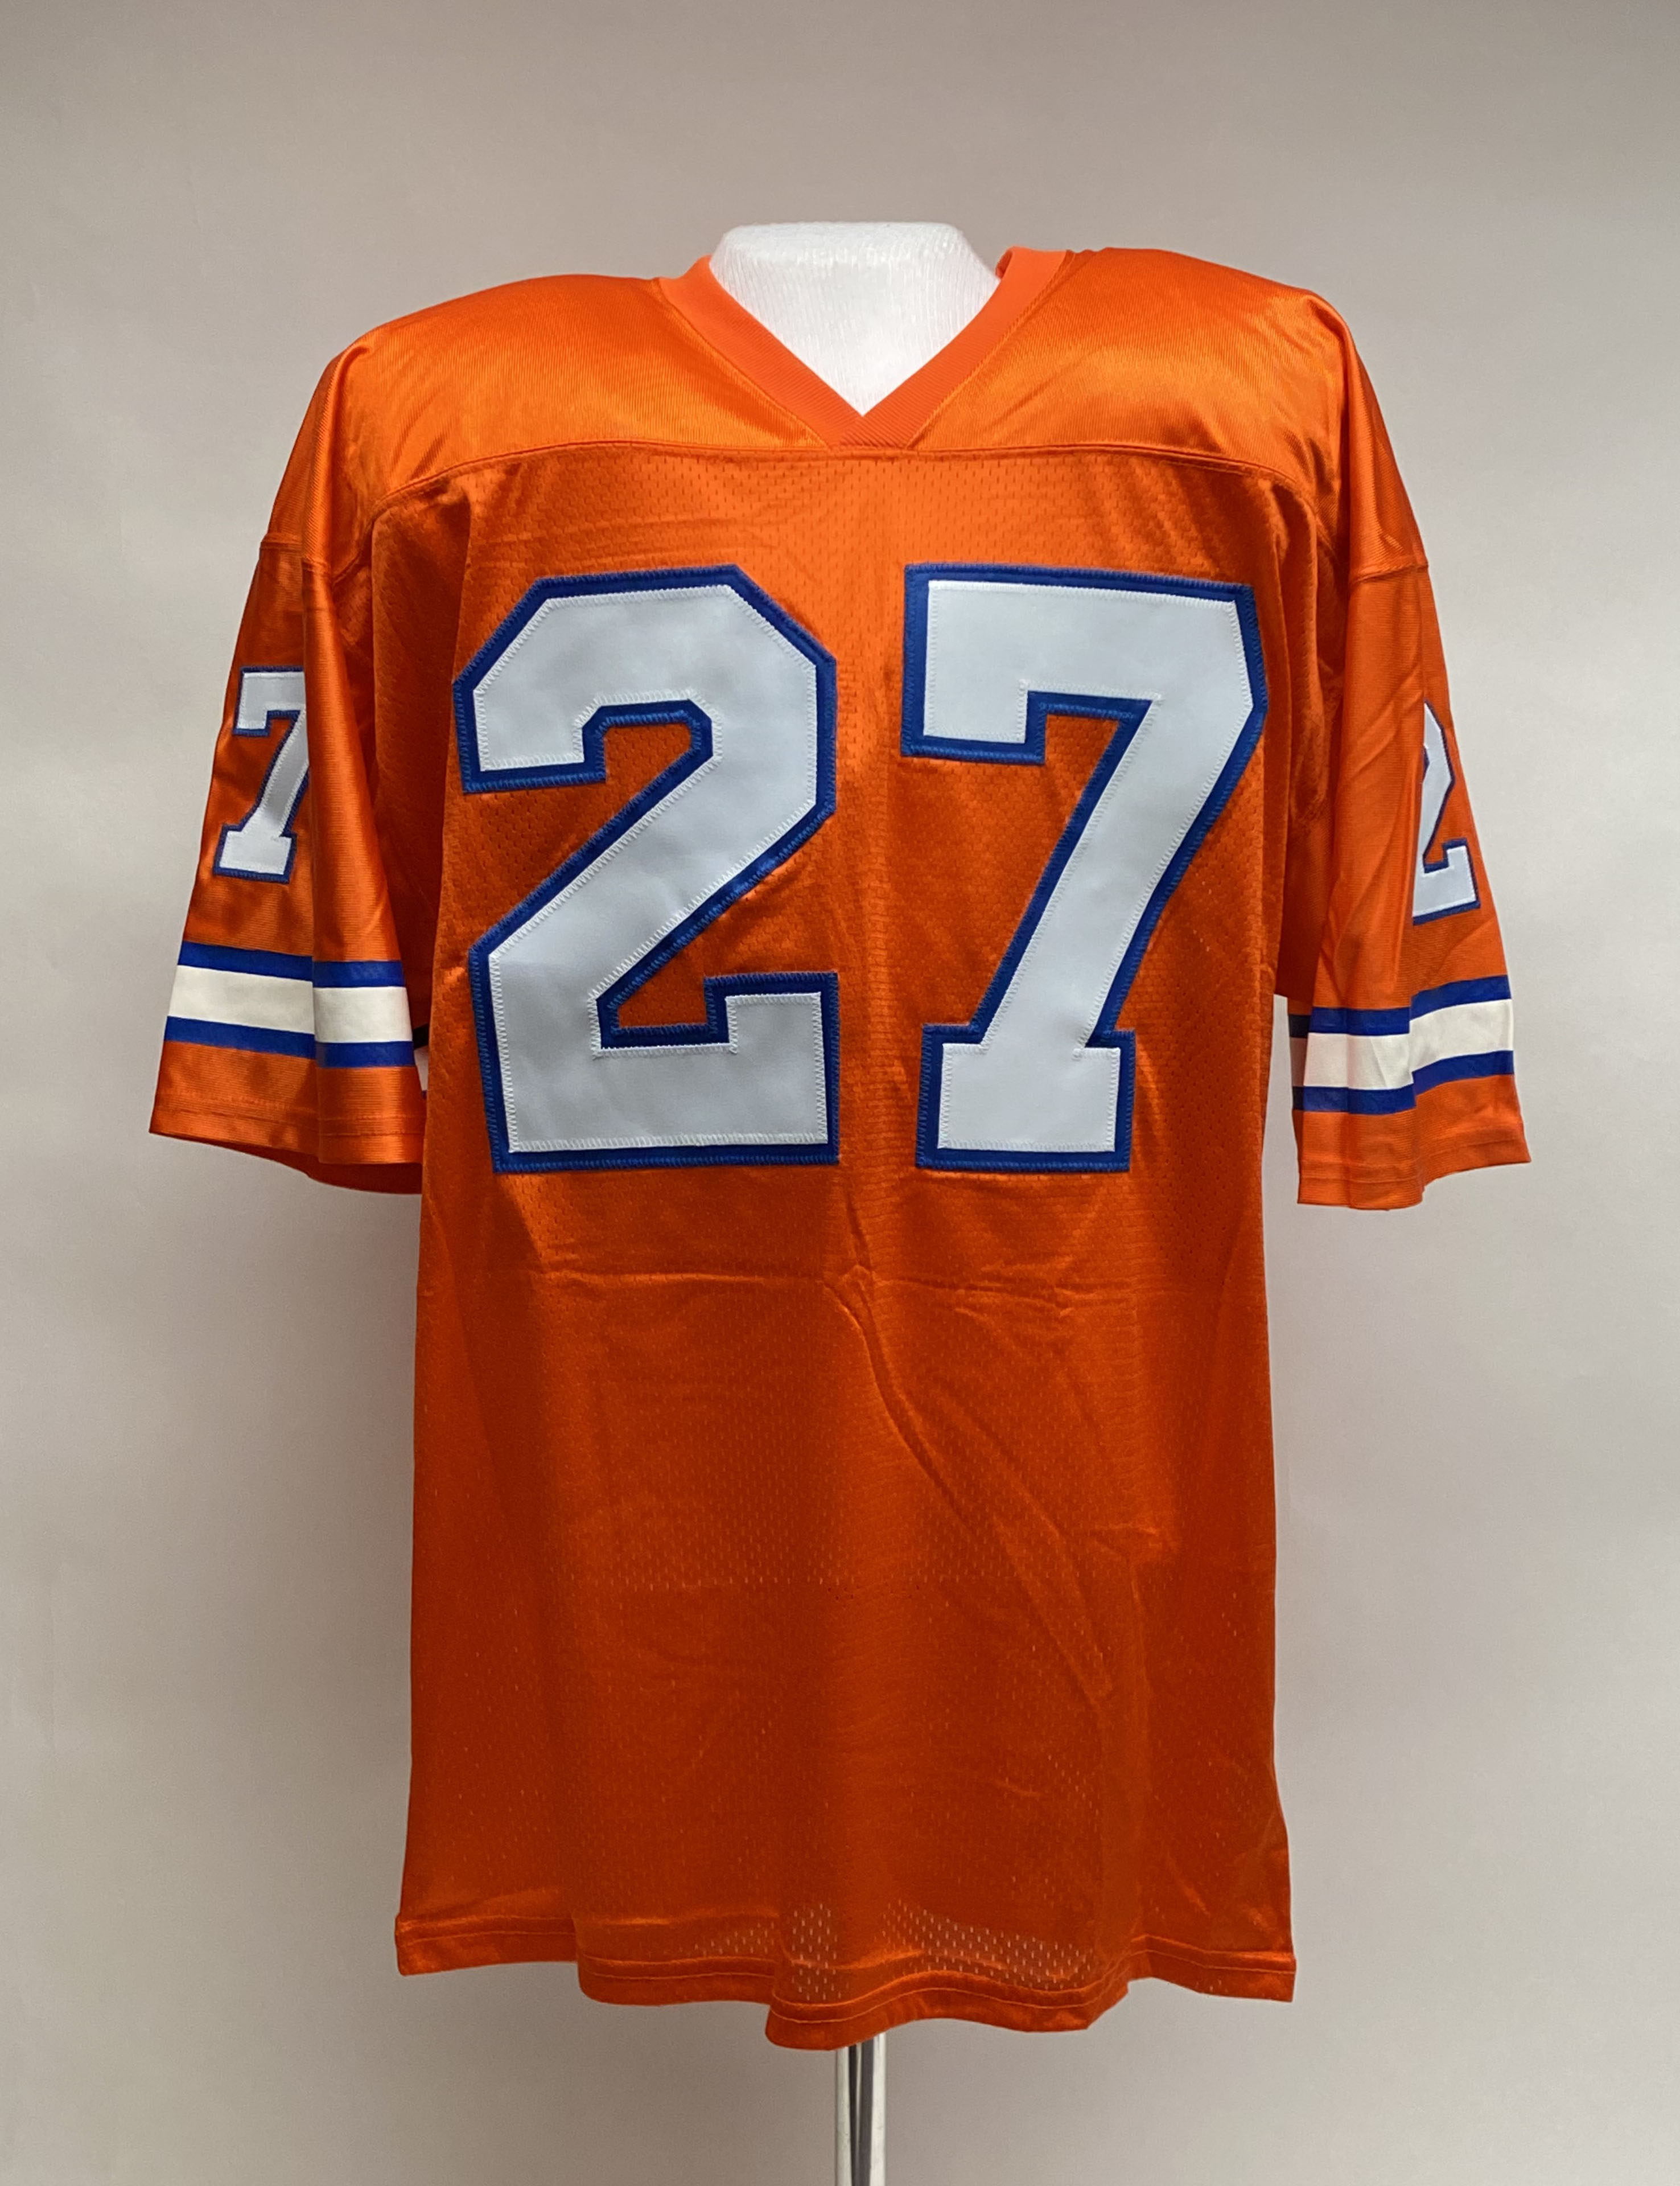 steve atwater throwback jersey